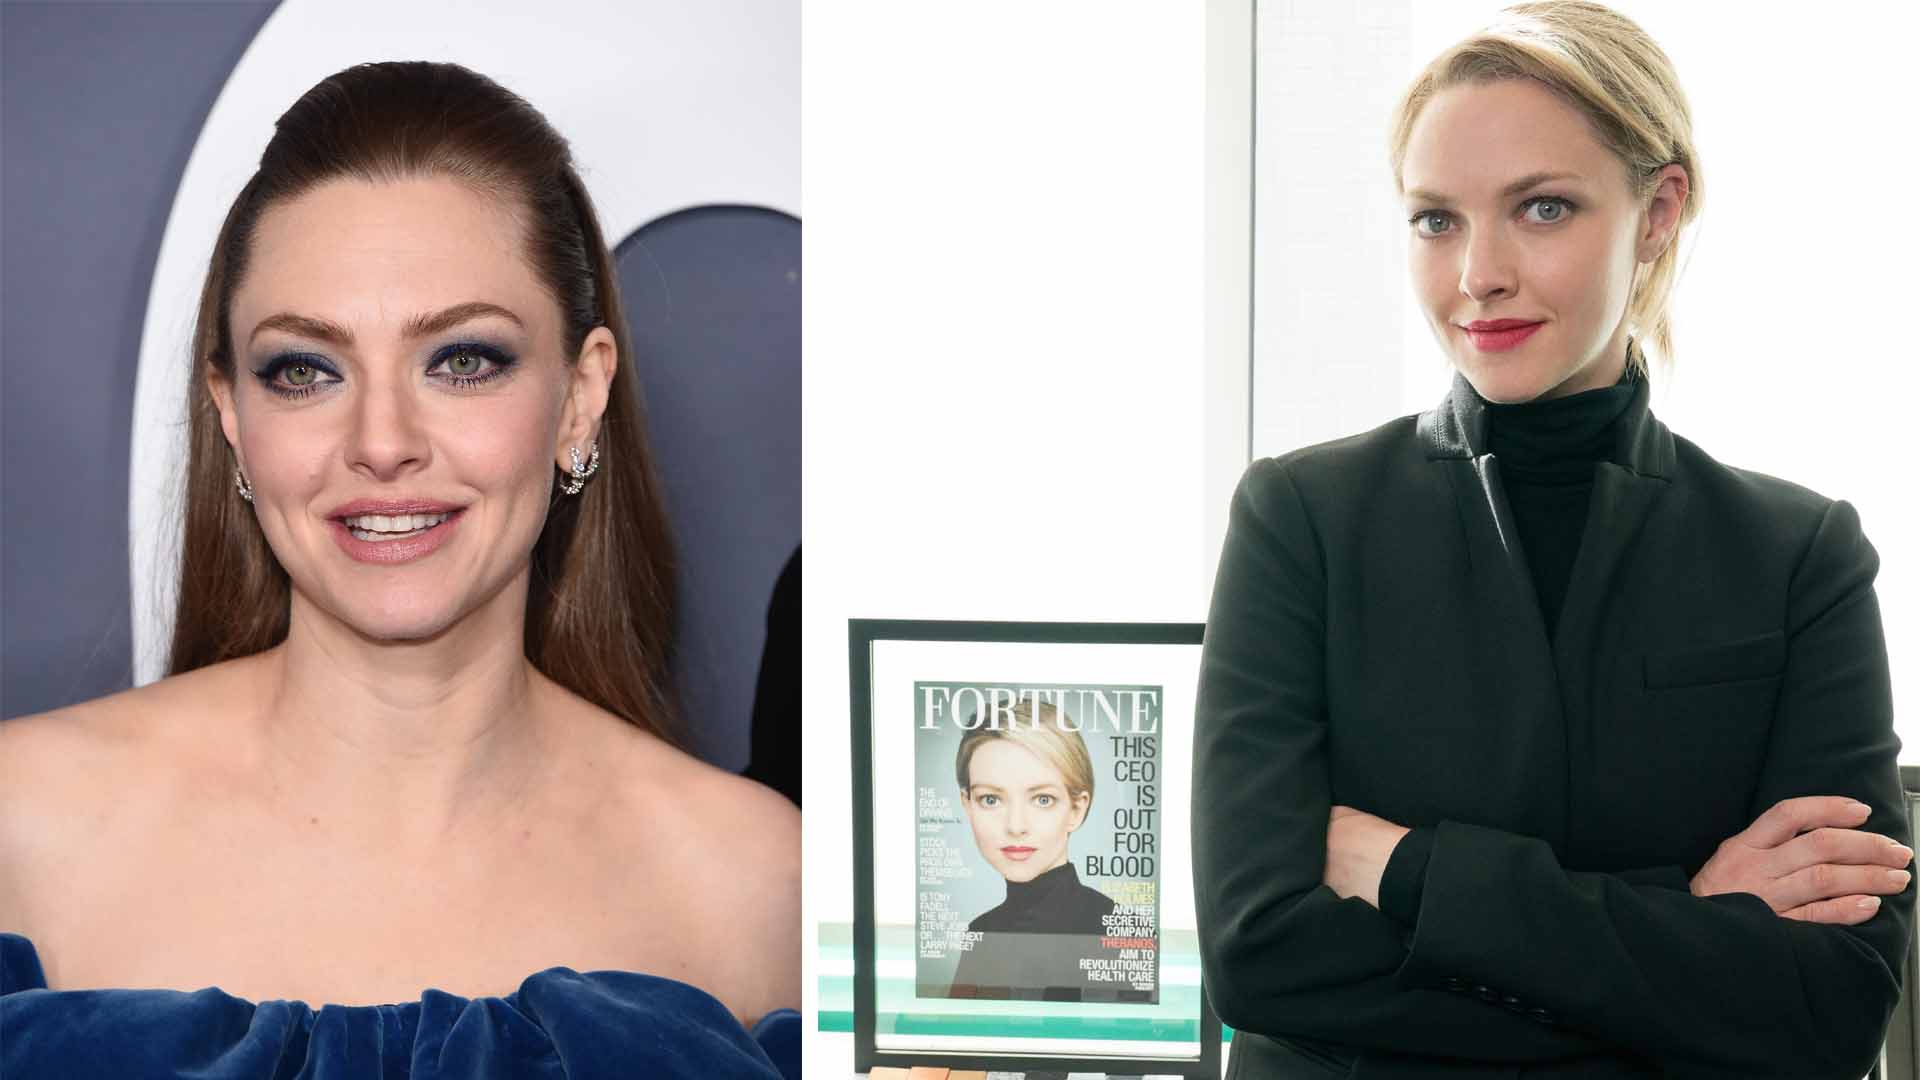 Amanda Seyfried Calls Ex-Theranos CEO Elizabeth Holmes "An Incredible Actor" For Her Ability To Defraud Investors